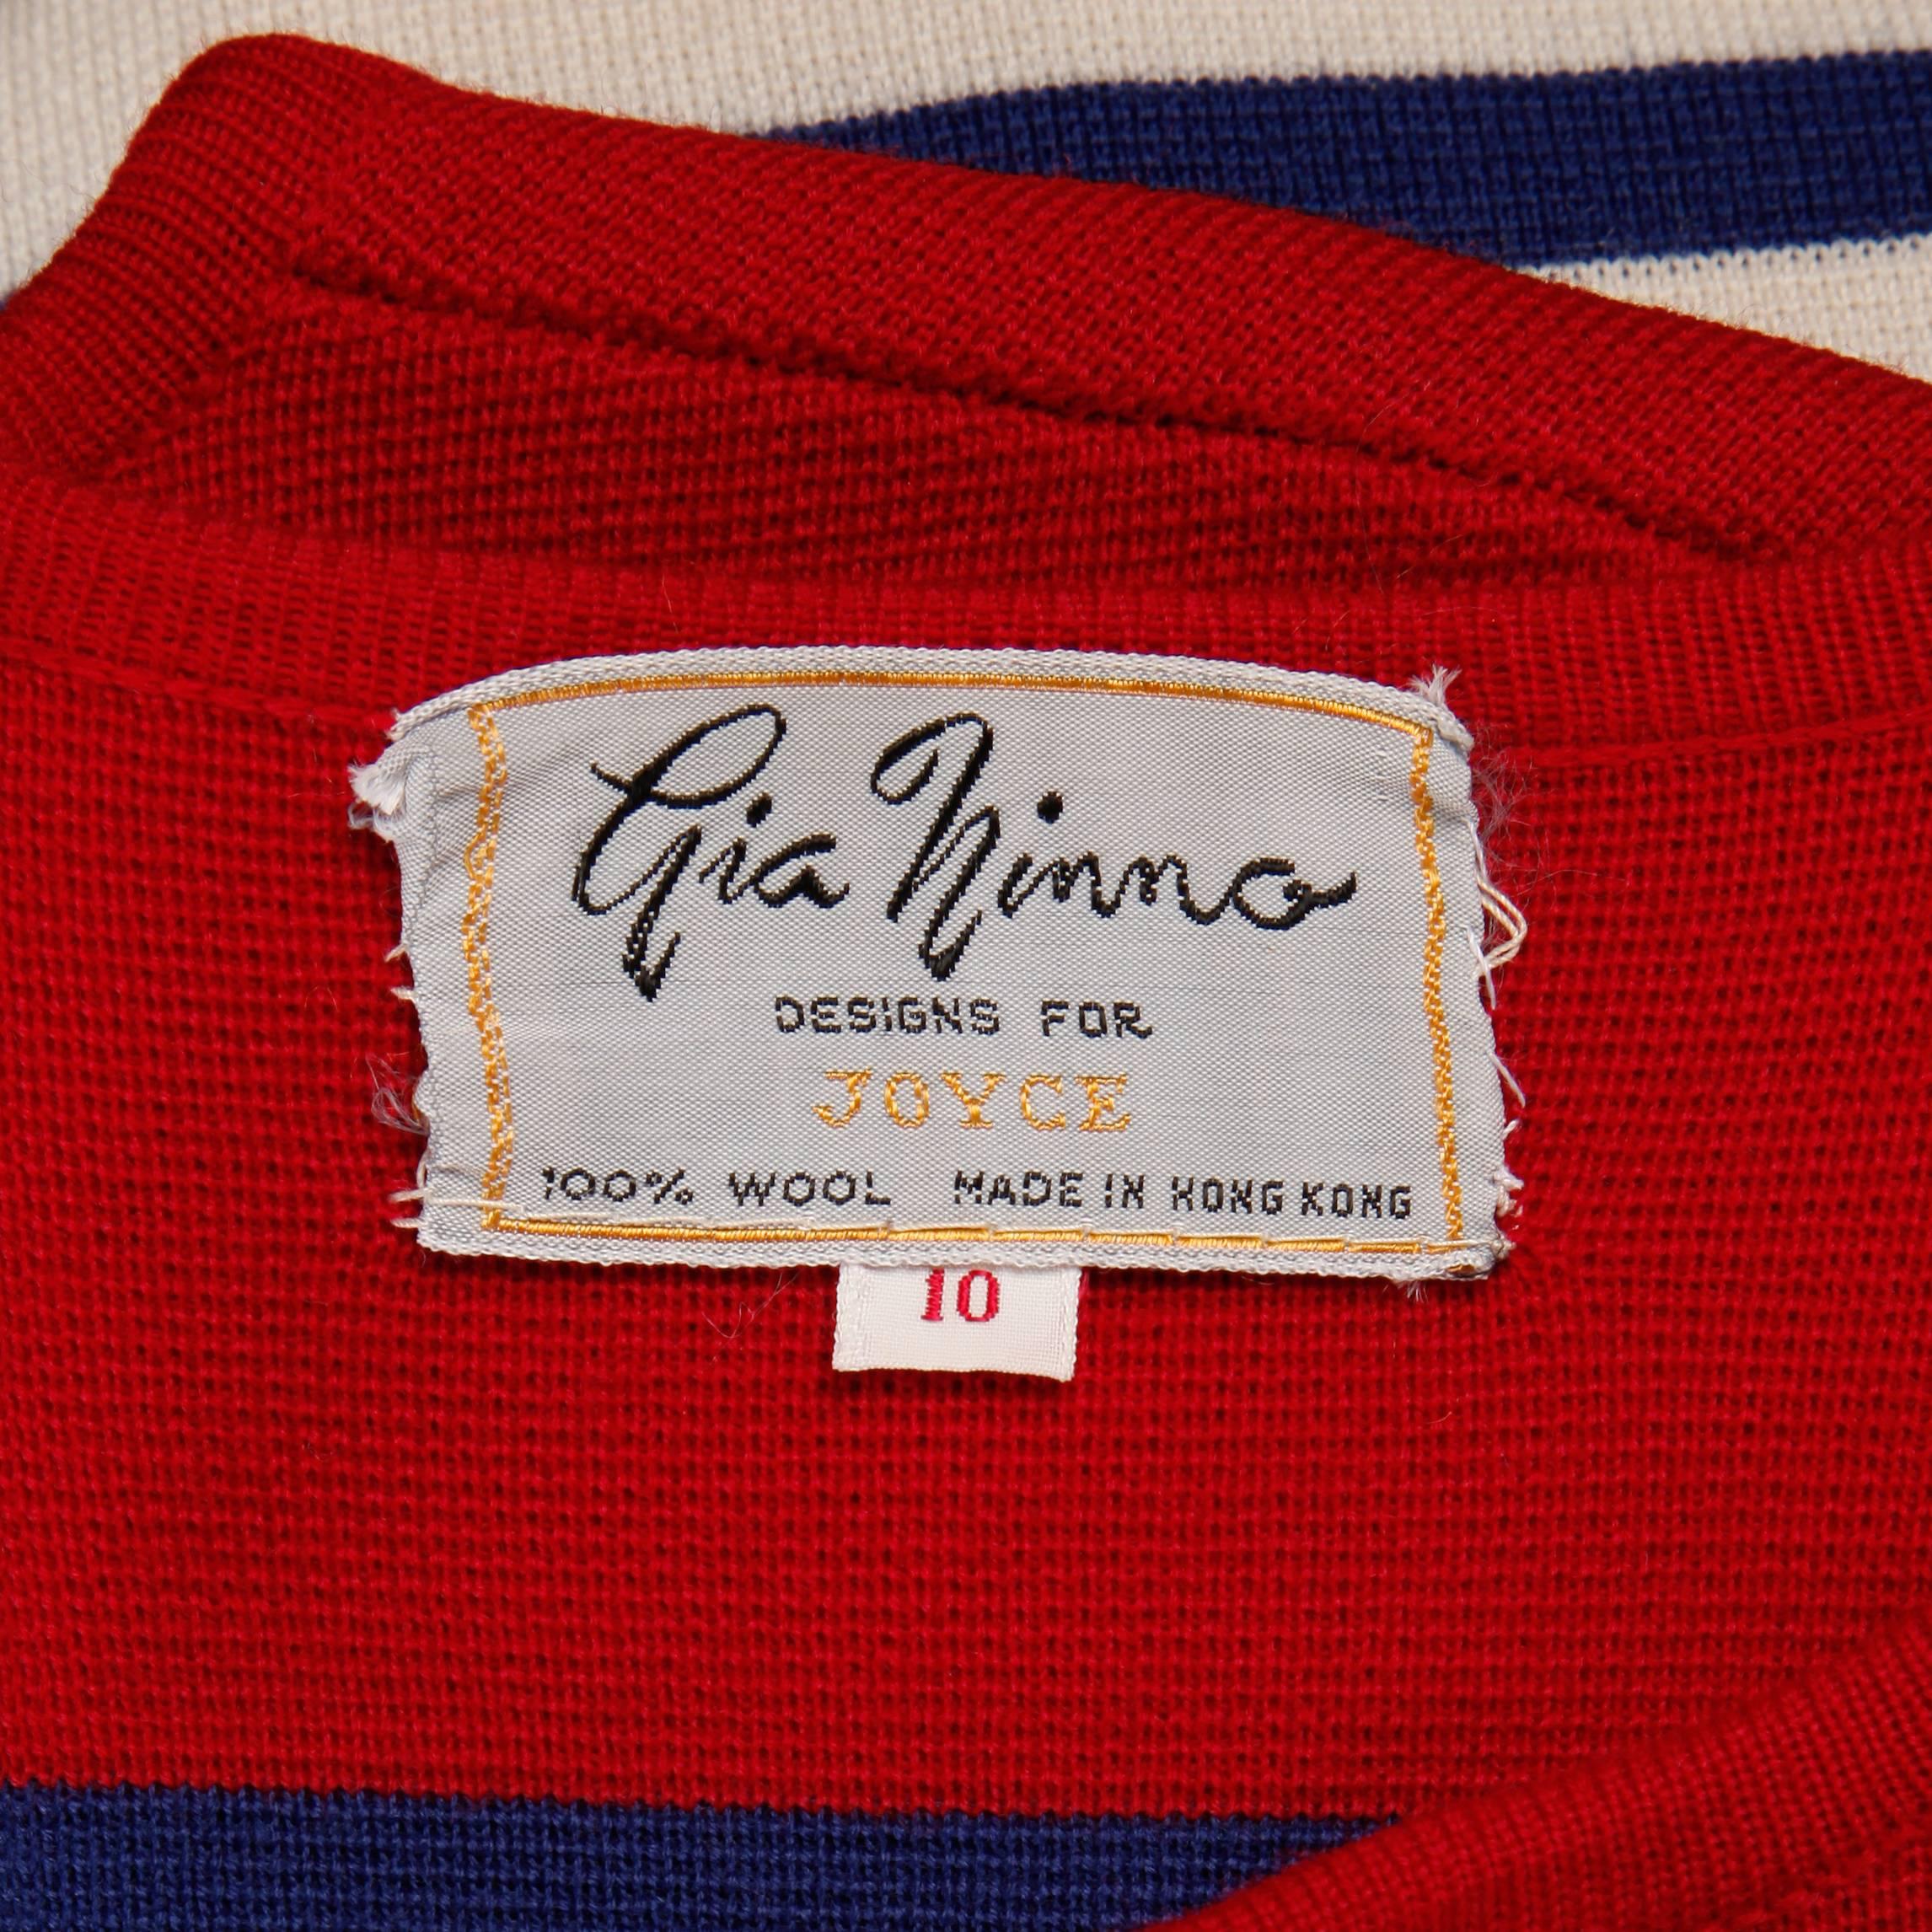 1960s Gia Ninno Vintage 100% Wool Knit Red, White Blue Striped Coat + Dress  1